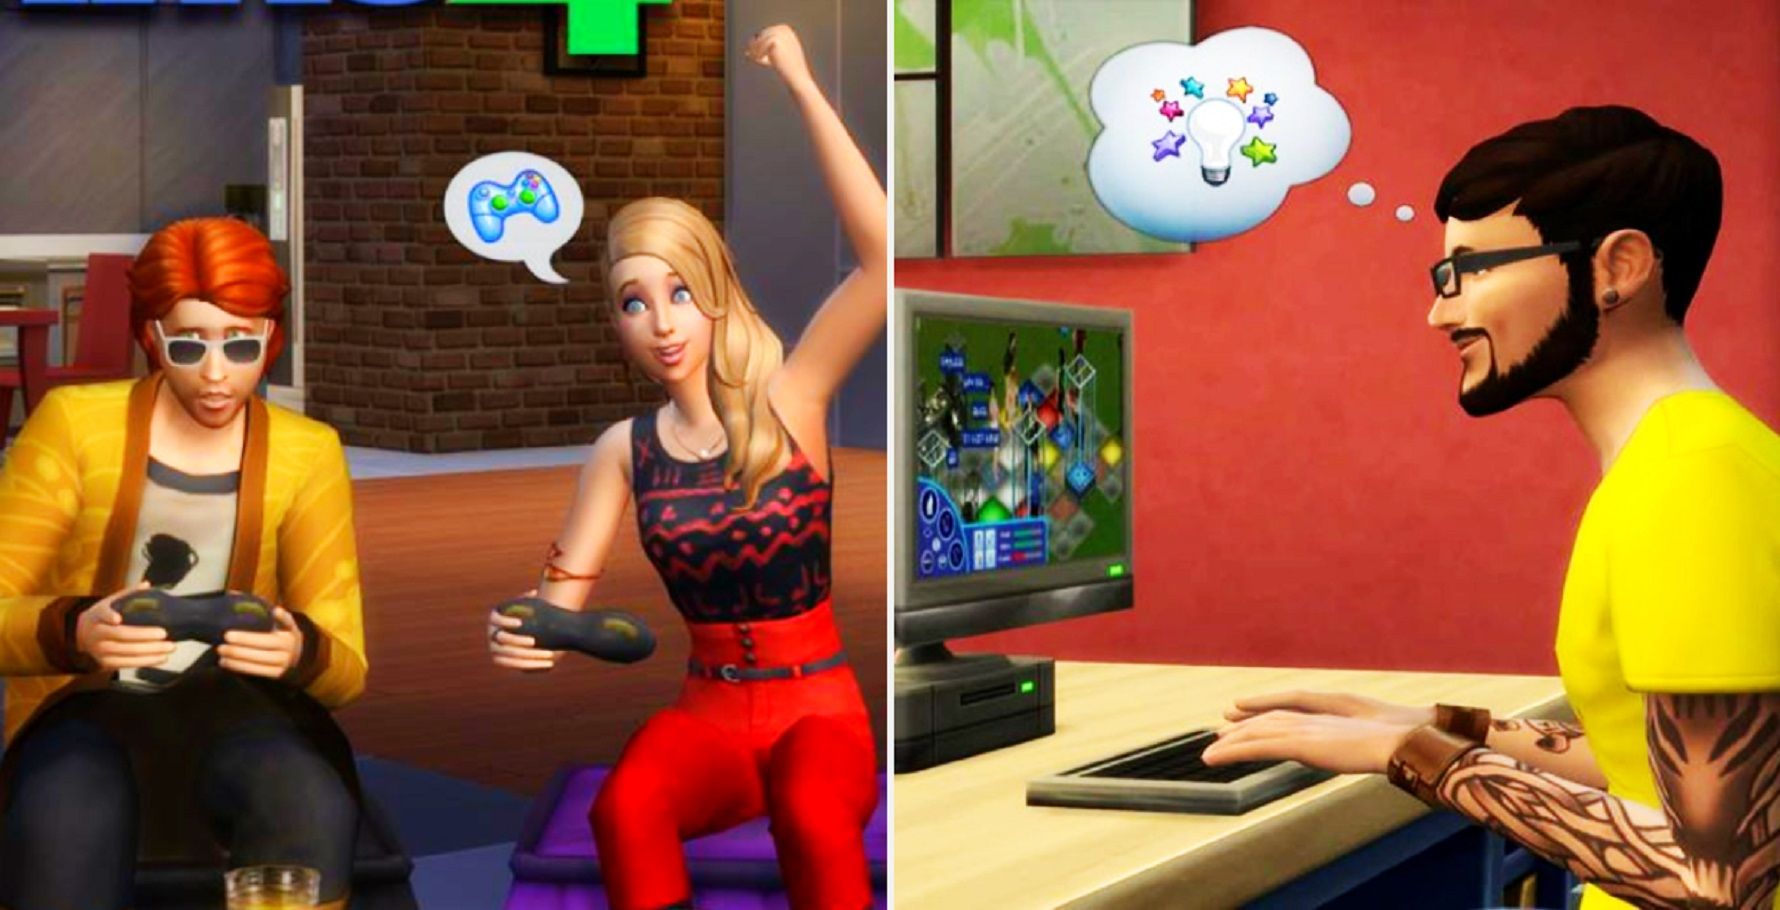 The Sims 4 Will Be Free to Play From Oct. 18 on PC, Consoles